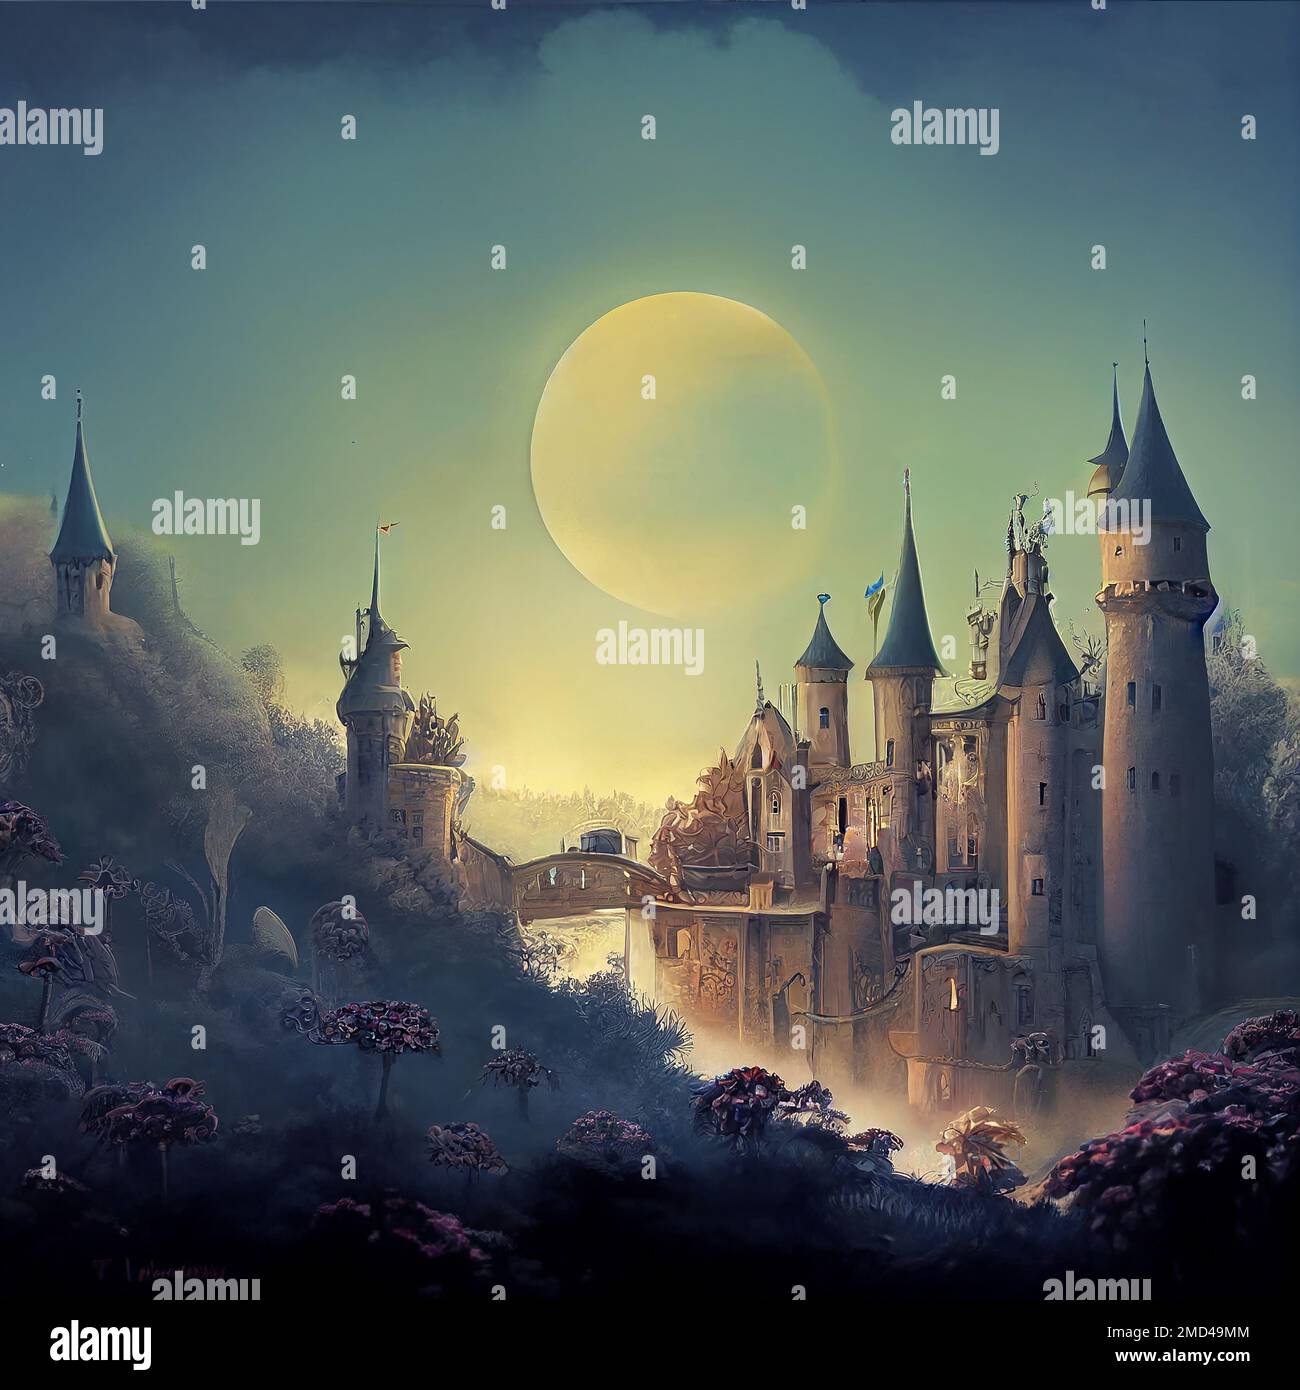 Fairytale castles and a full moon on a magical landscape. Dreamy background Stock Photo